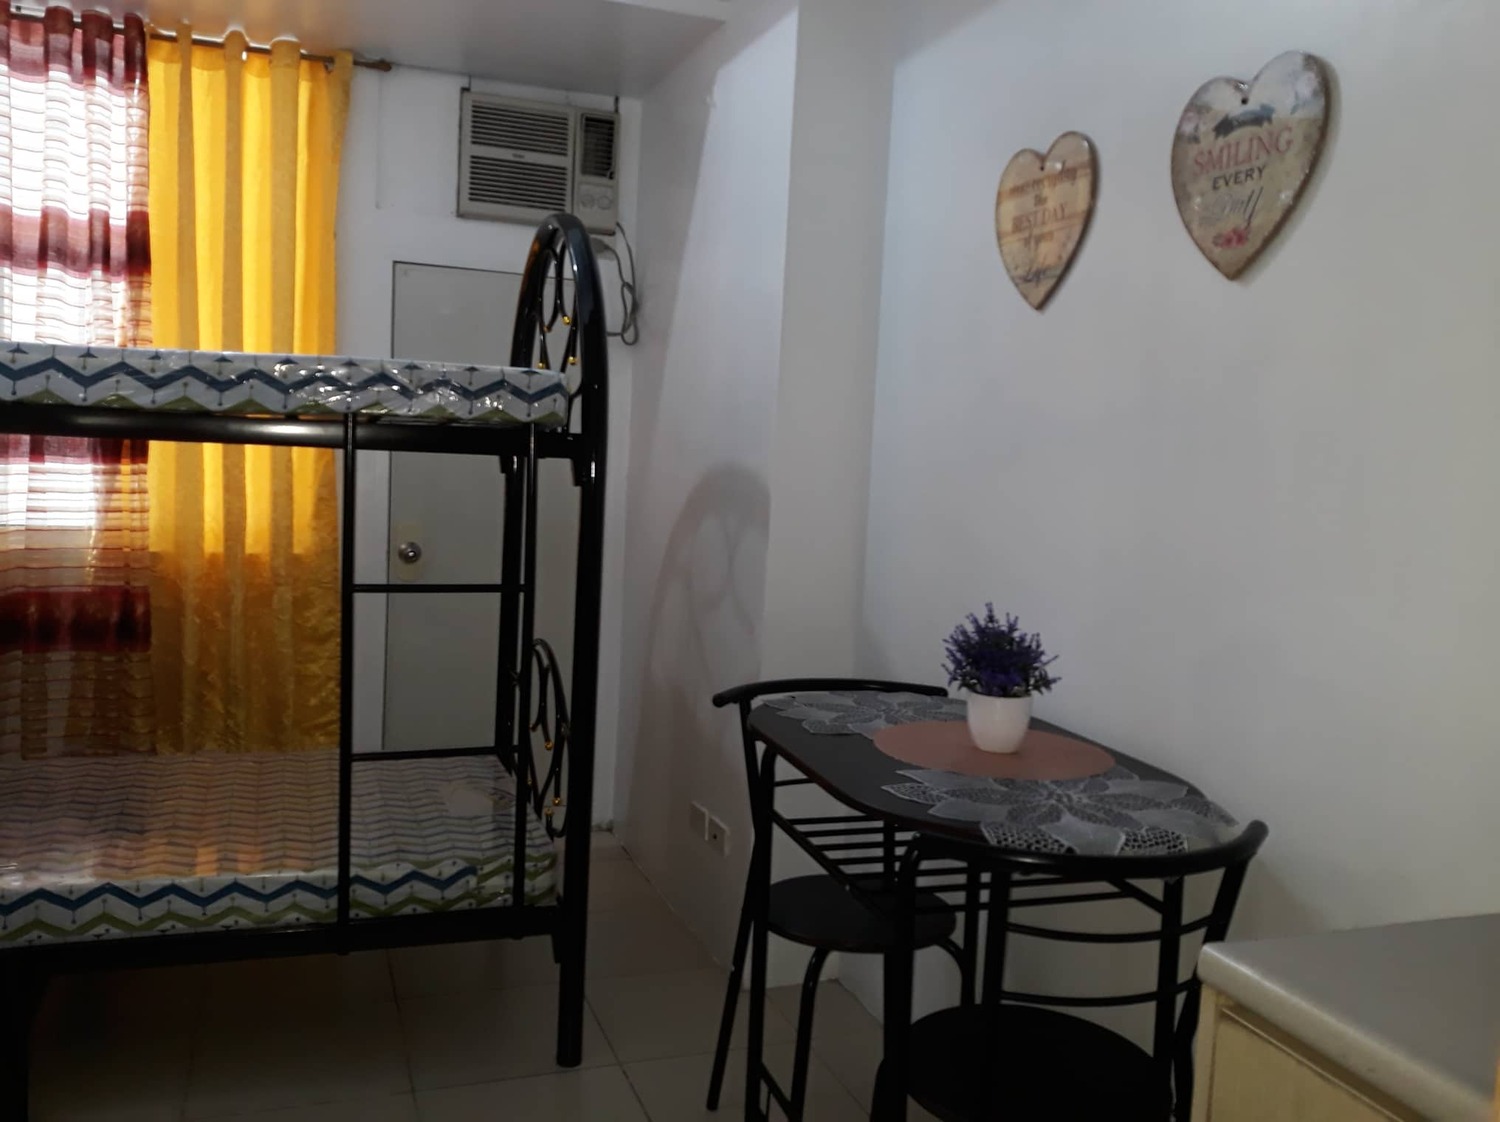 <span style="font-weight: bold;">Semi-Furnished Studio unit for rent suitable for two persons</span><br>